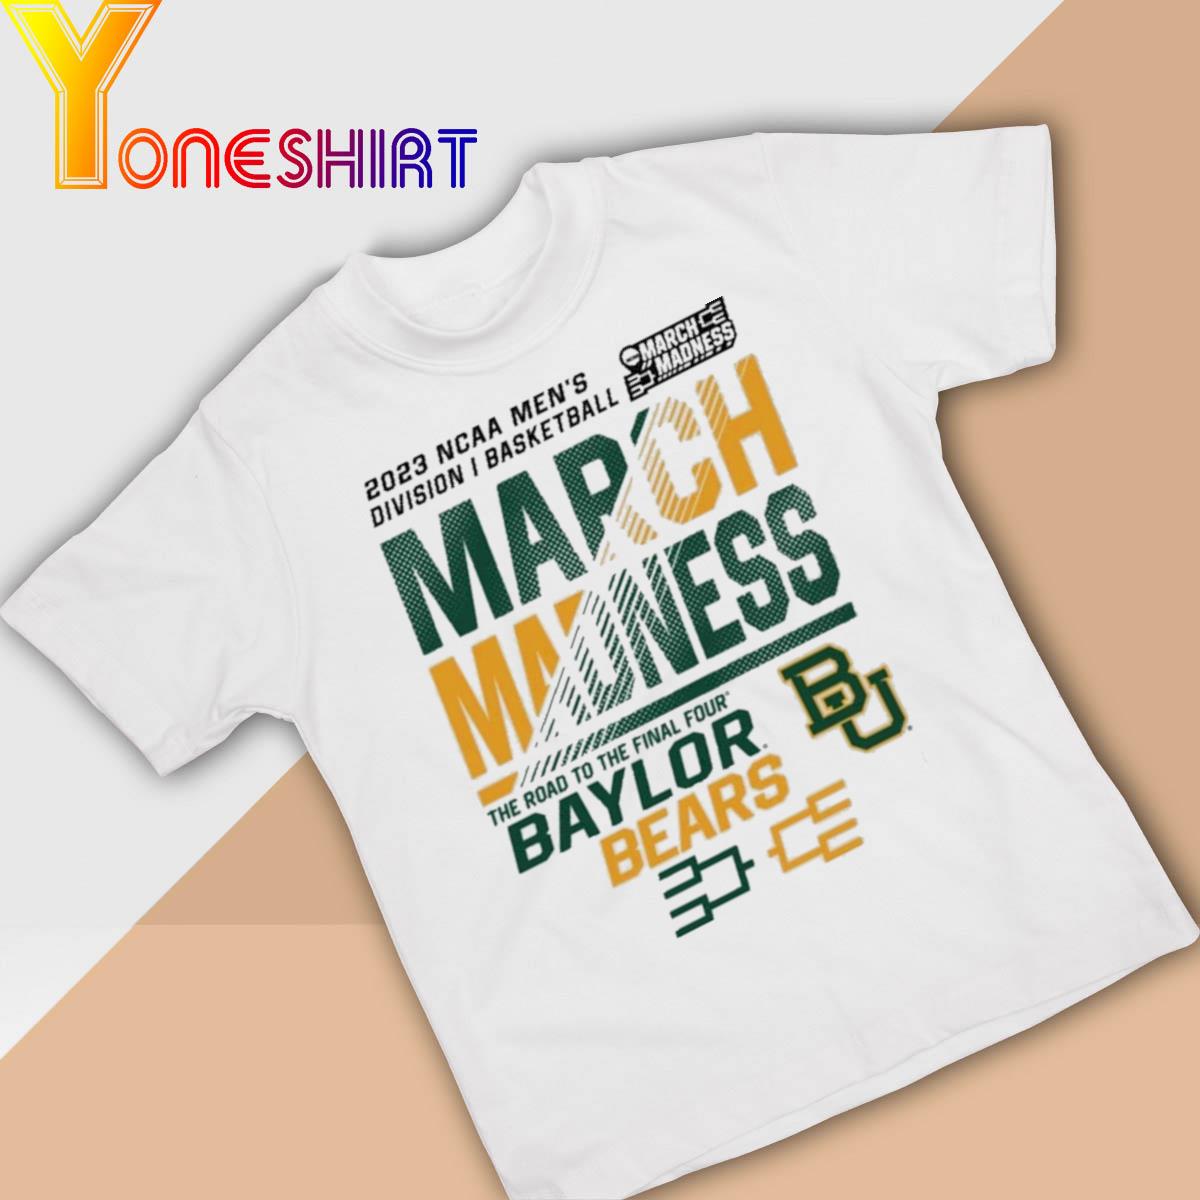 Original 2023 Ncaa Men's Division I Basketball March Madness the road to the Final Four Baylor Bears shirt